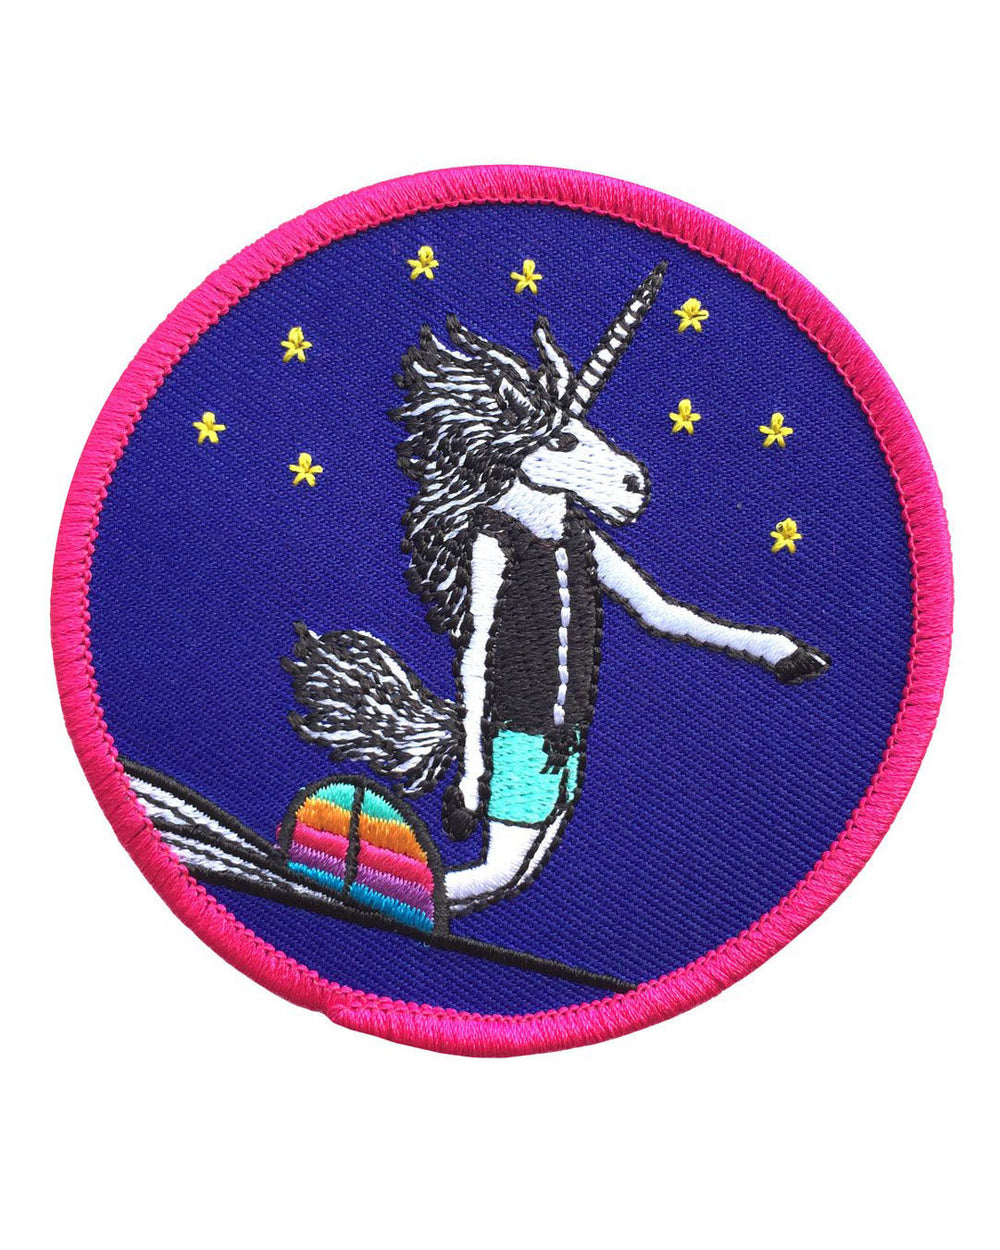 Surfing Unicorn Embroidered Patch